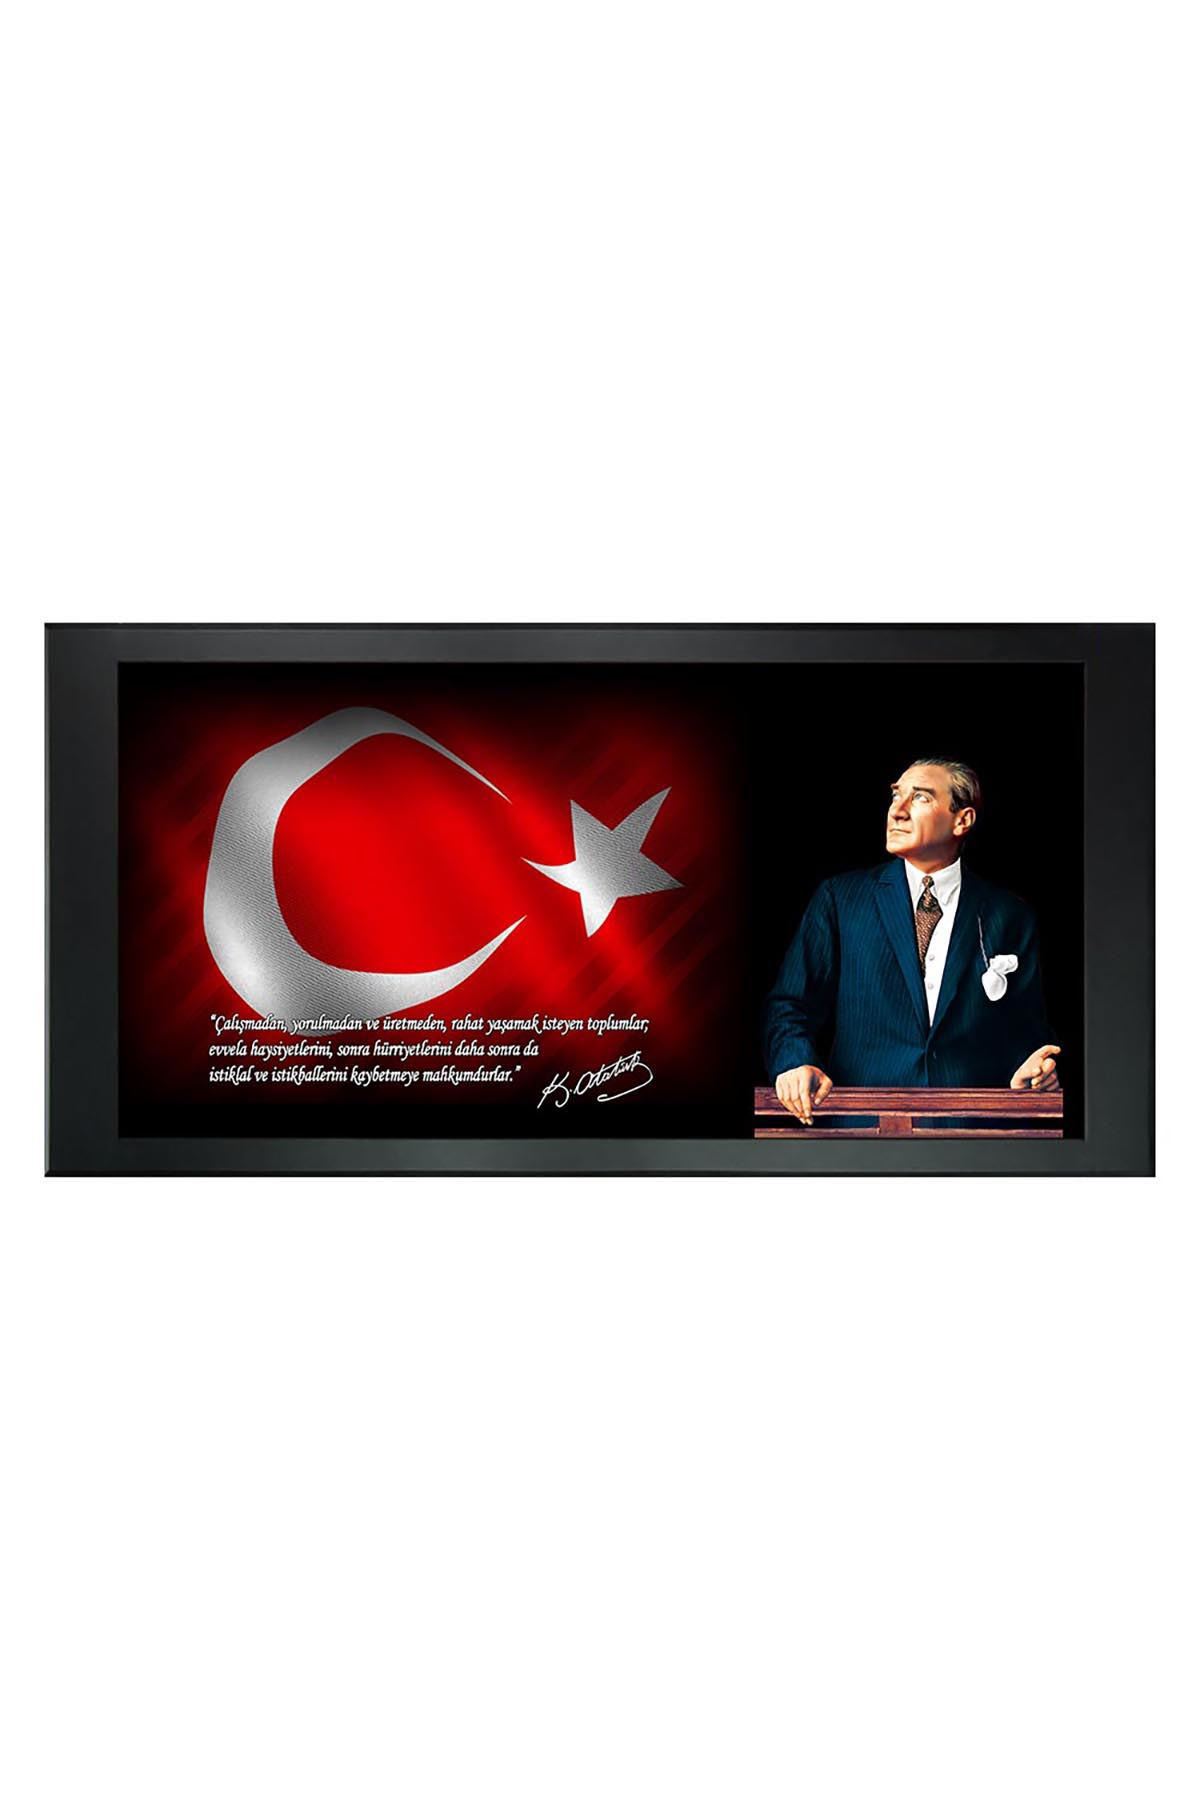 Atatürk Printed Manager Board | Printed Manager Board | Leather Framed Board | High Quality Manager Board   